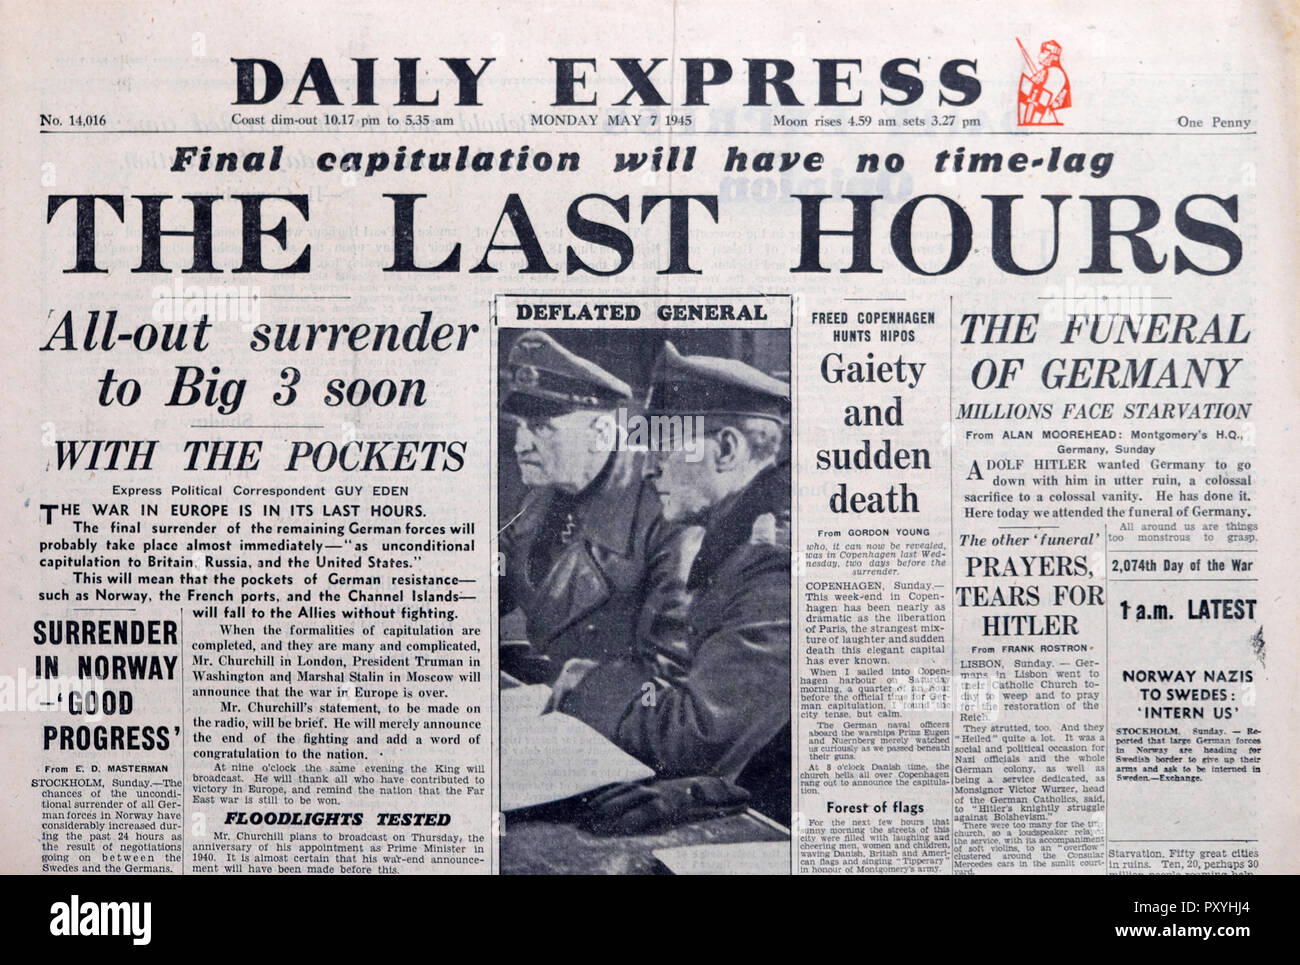 spiller Misbrug chant THE LAST HOURS" Daily Express front page newspaper Second World War  headline on the end of World War II WWII in MAY 7 1945 London England UK  Stock Photo - Alamy